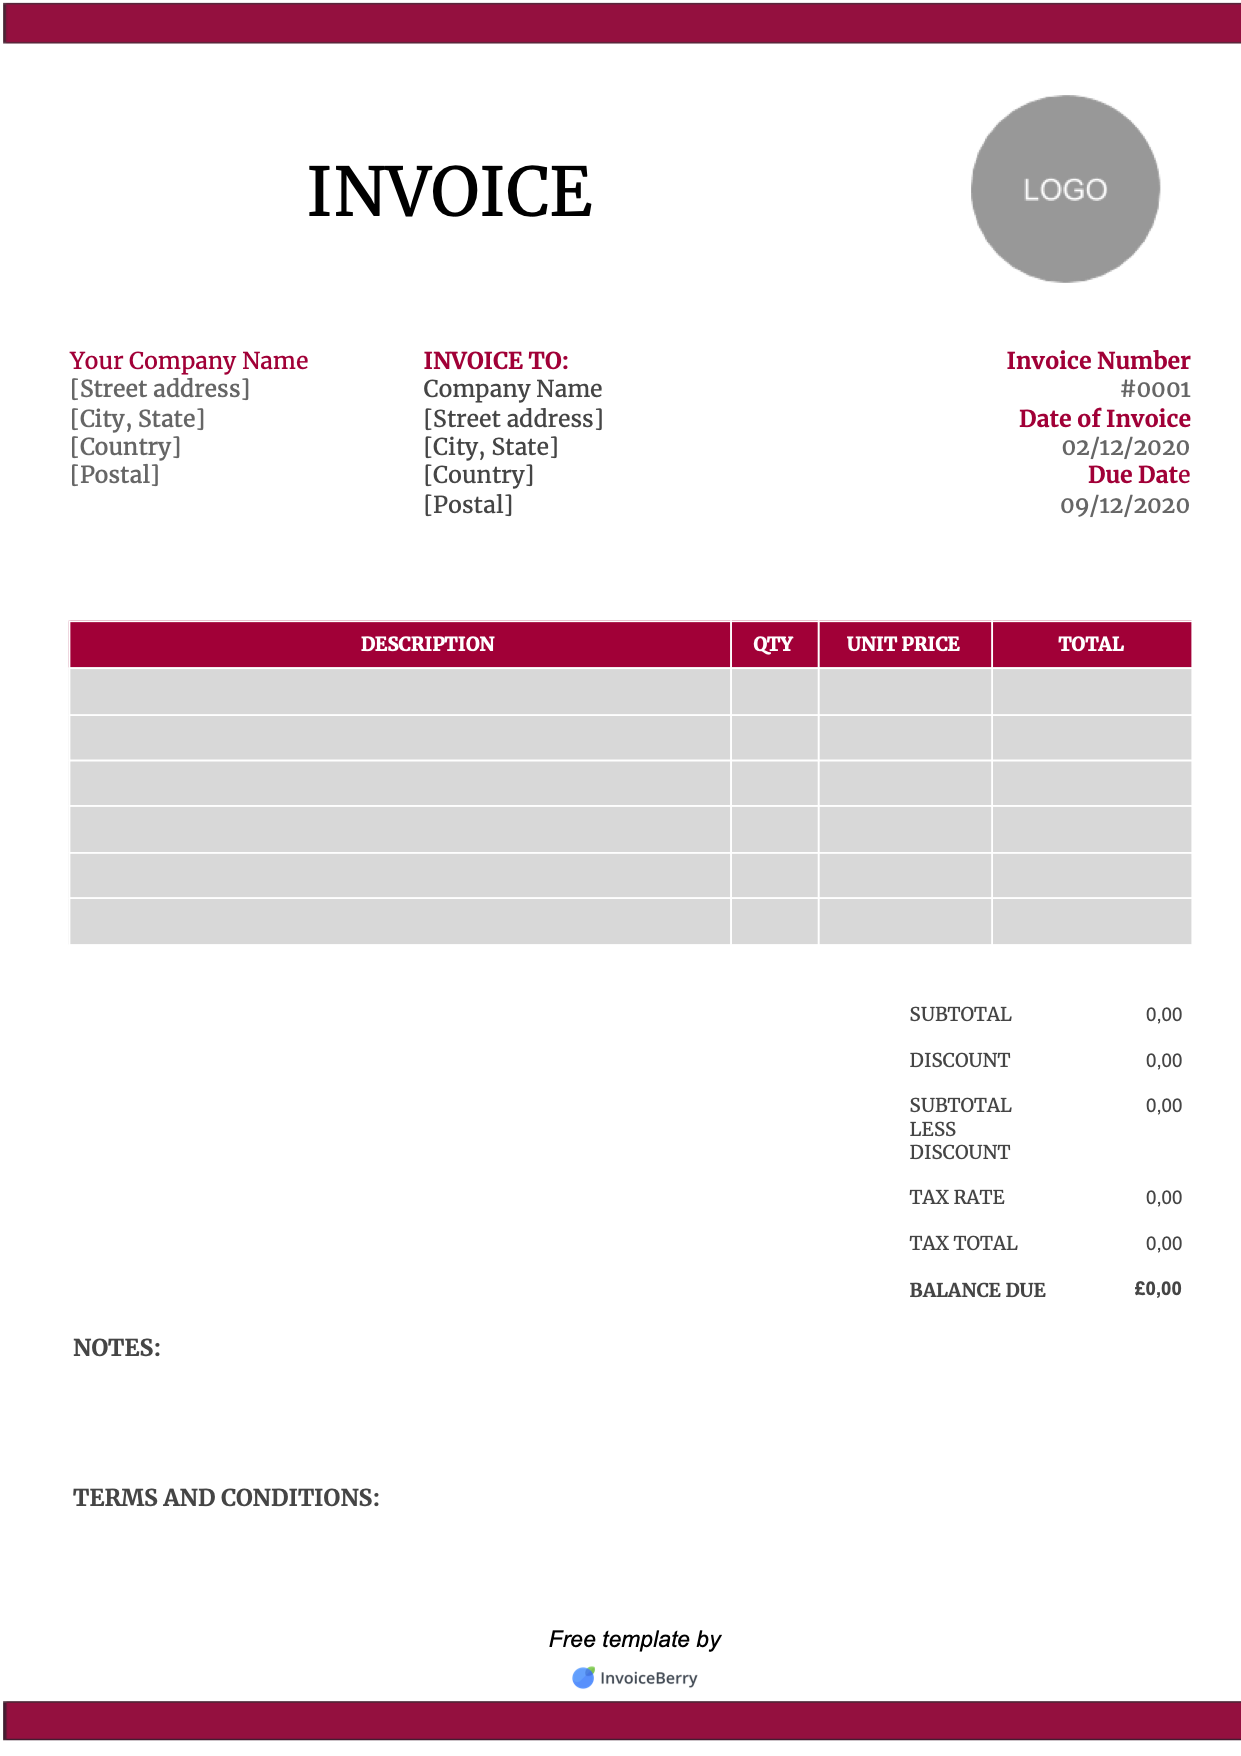 Free UK Invoice Template Sample #20 Download  InvoiceBerry Intended For Business Invoice Template Uk